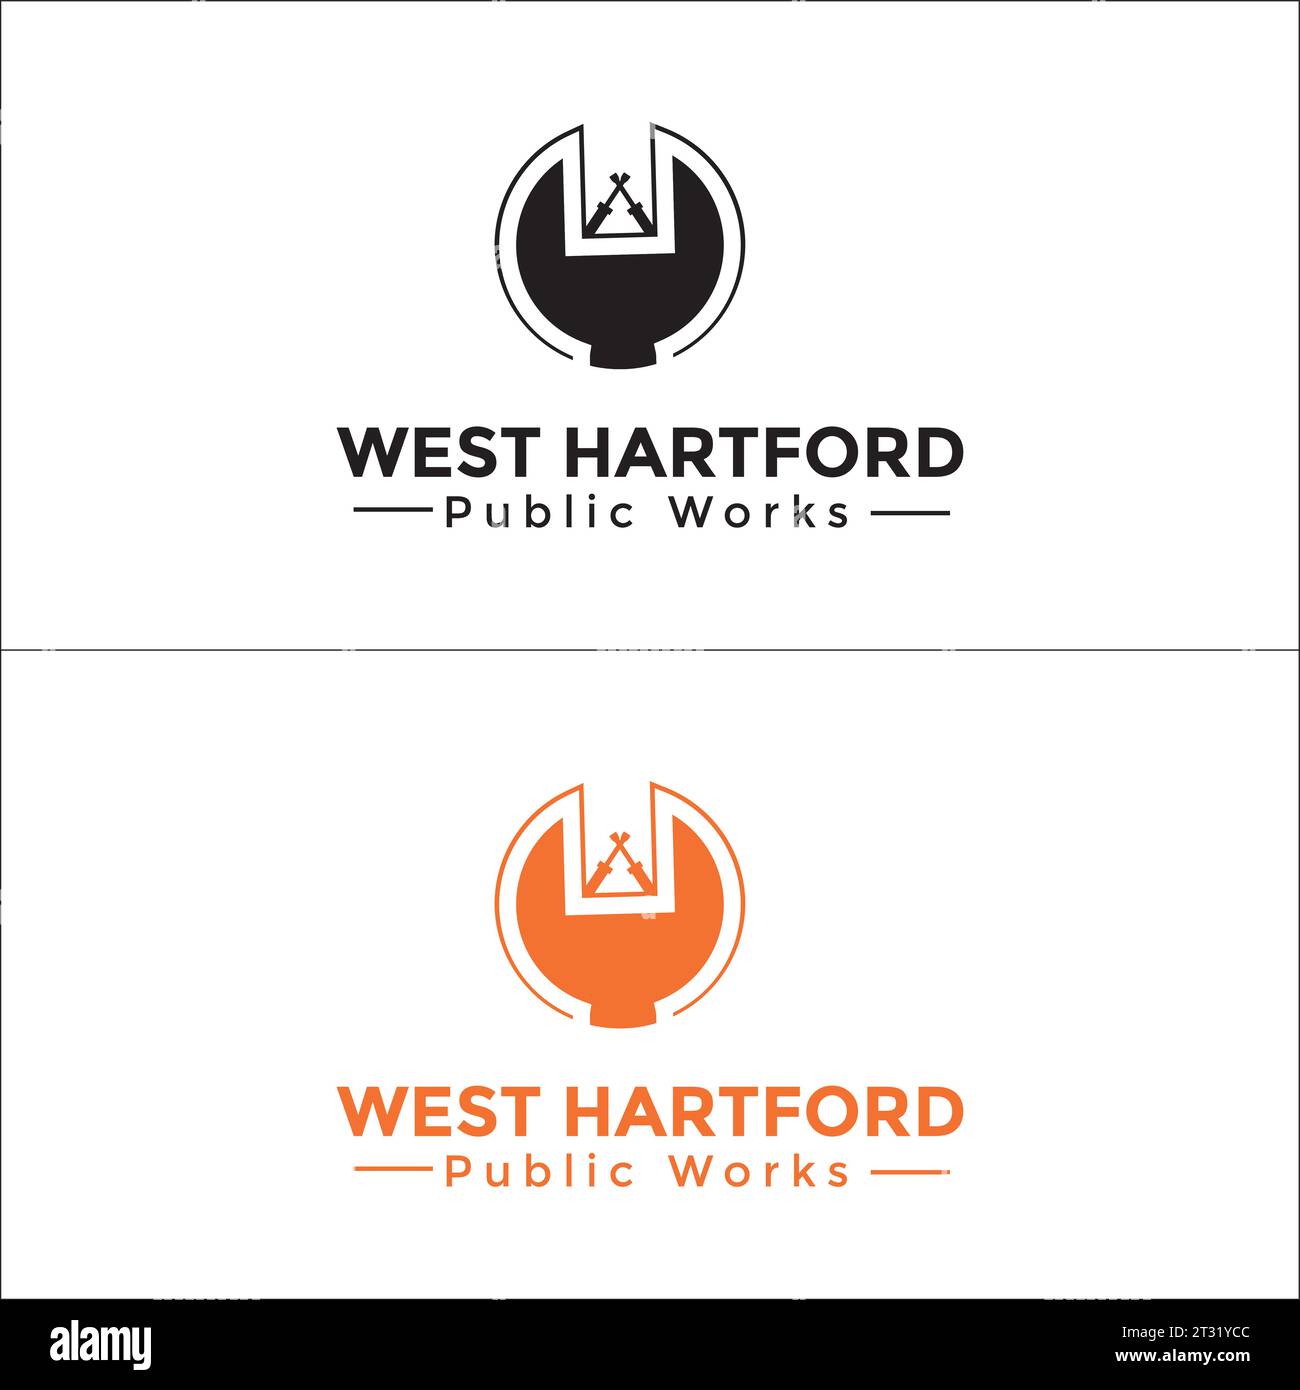 Public Maintinence Company Logo Design in Colorful and Black and White Form Stock Vector